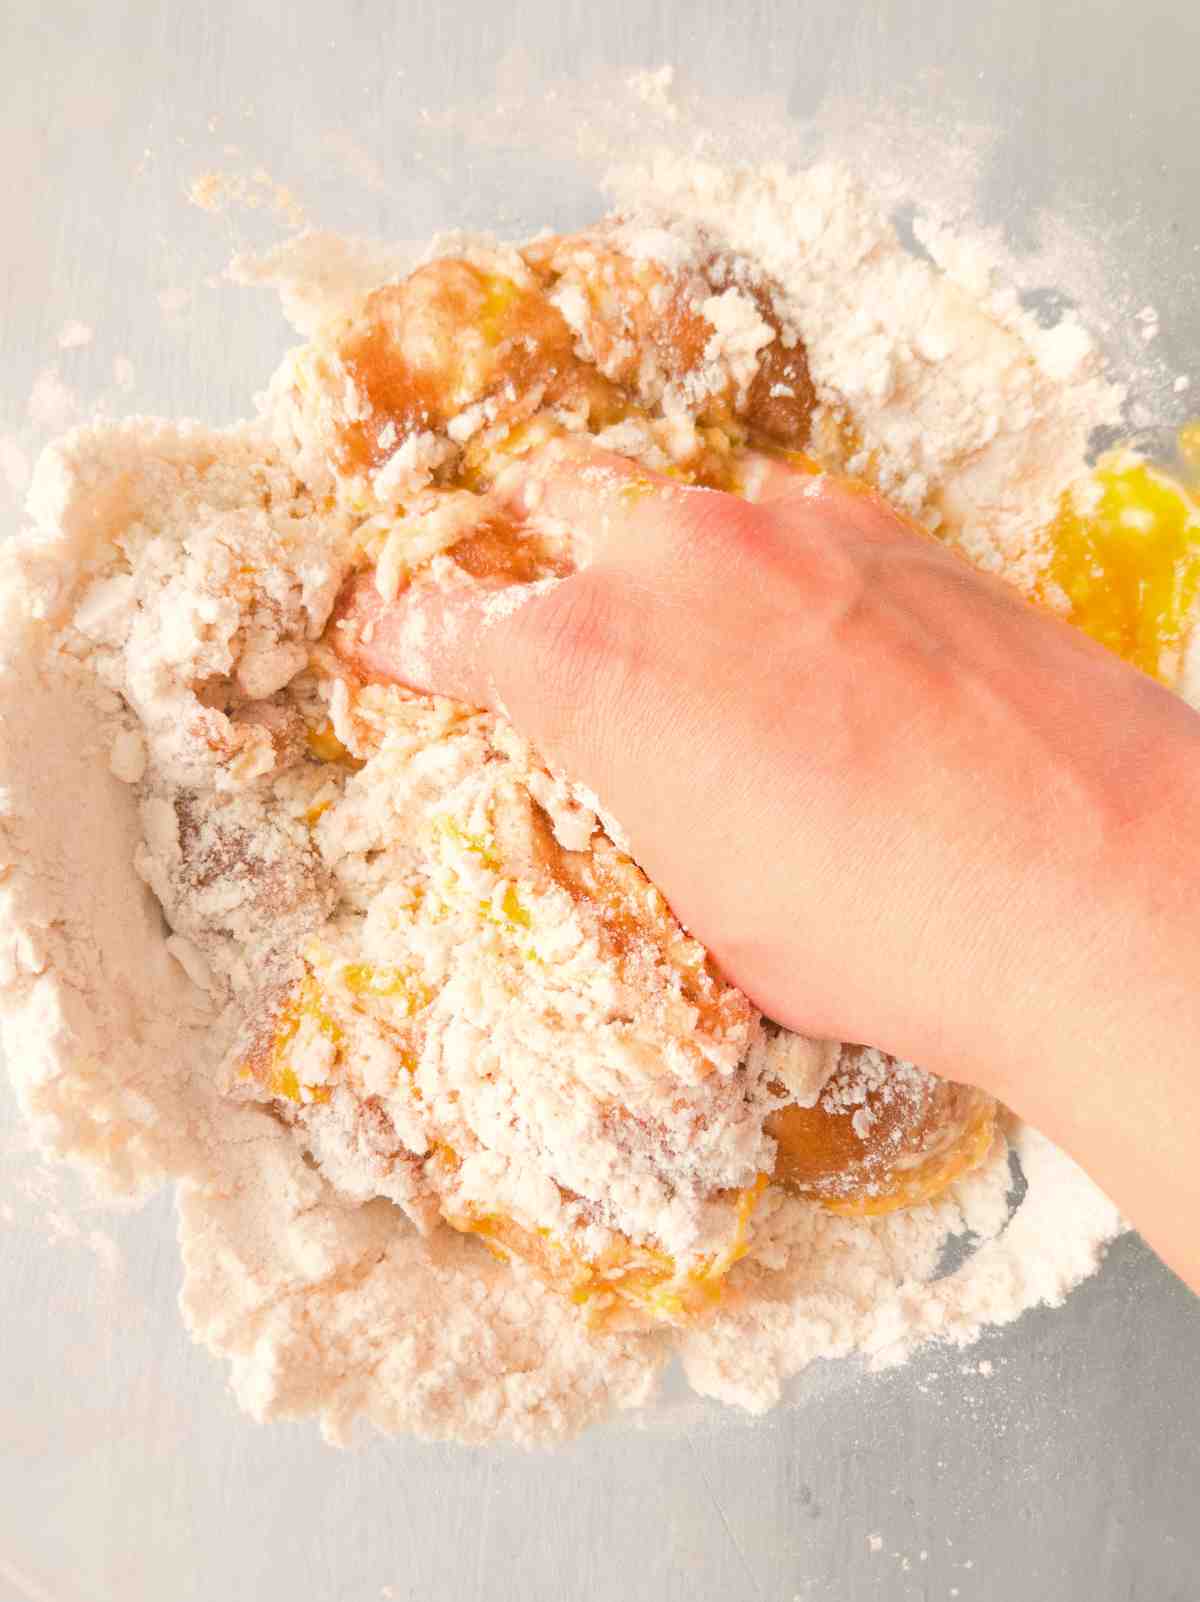 Mixing the dough by hand in a large glass bowl.